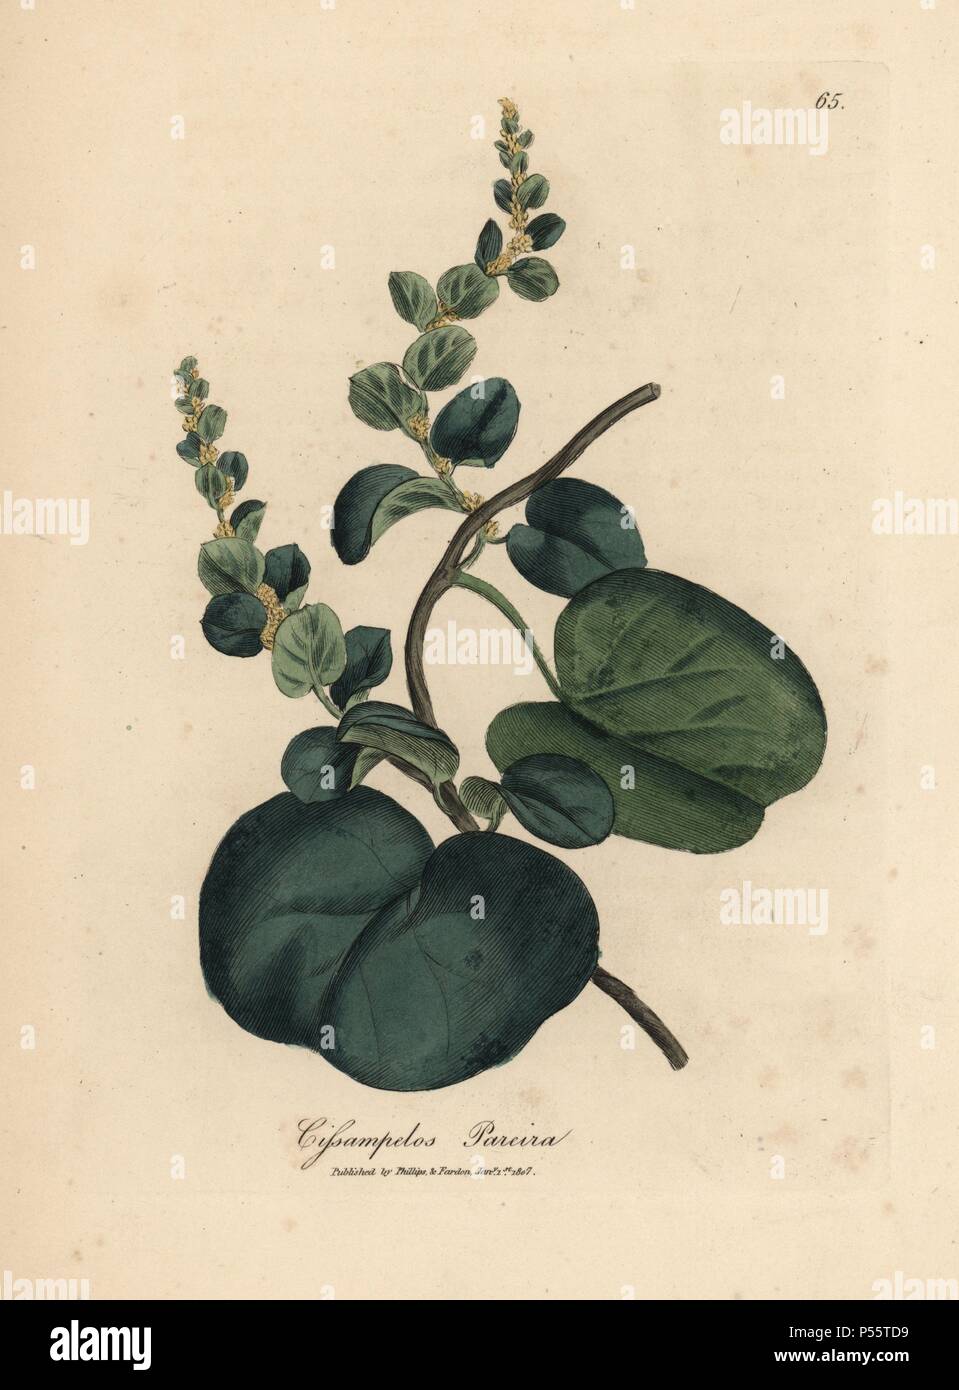 Pareira brava cissampelos, Cissampelos pareira. Handcoloured copperplate engraving from a botanical illustration by James Sowerby from William Woodville and Sir William Jackson Hooker's 'Medical Botany,' John Bohn, London, 1832. The tireless Sowerby (1757-1822) drew over 2, 500 plants for Smith's mammoth 'English Botany' (1790-1814) and 440 mushrooms for 'Coloured Figures of English Fungi ' (1797) among many other works. Stock Photo